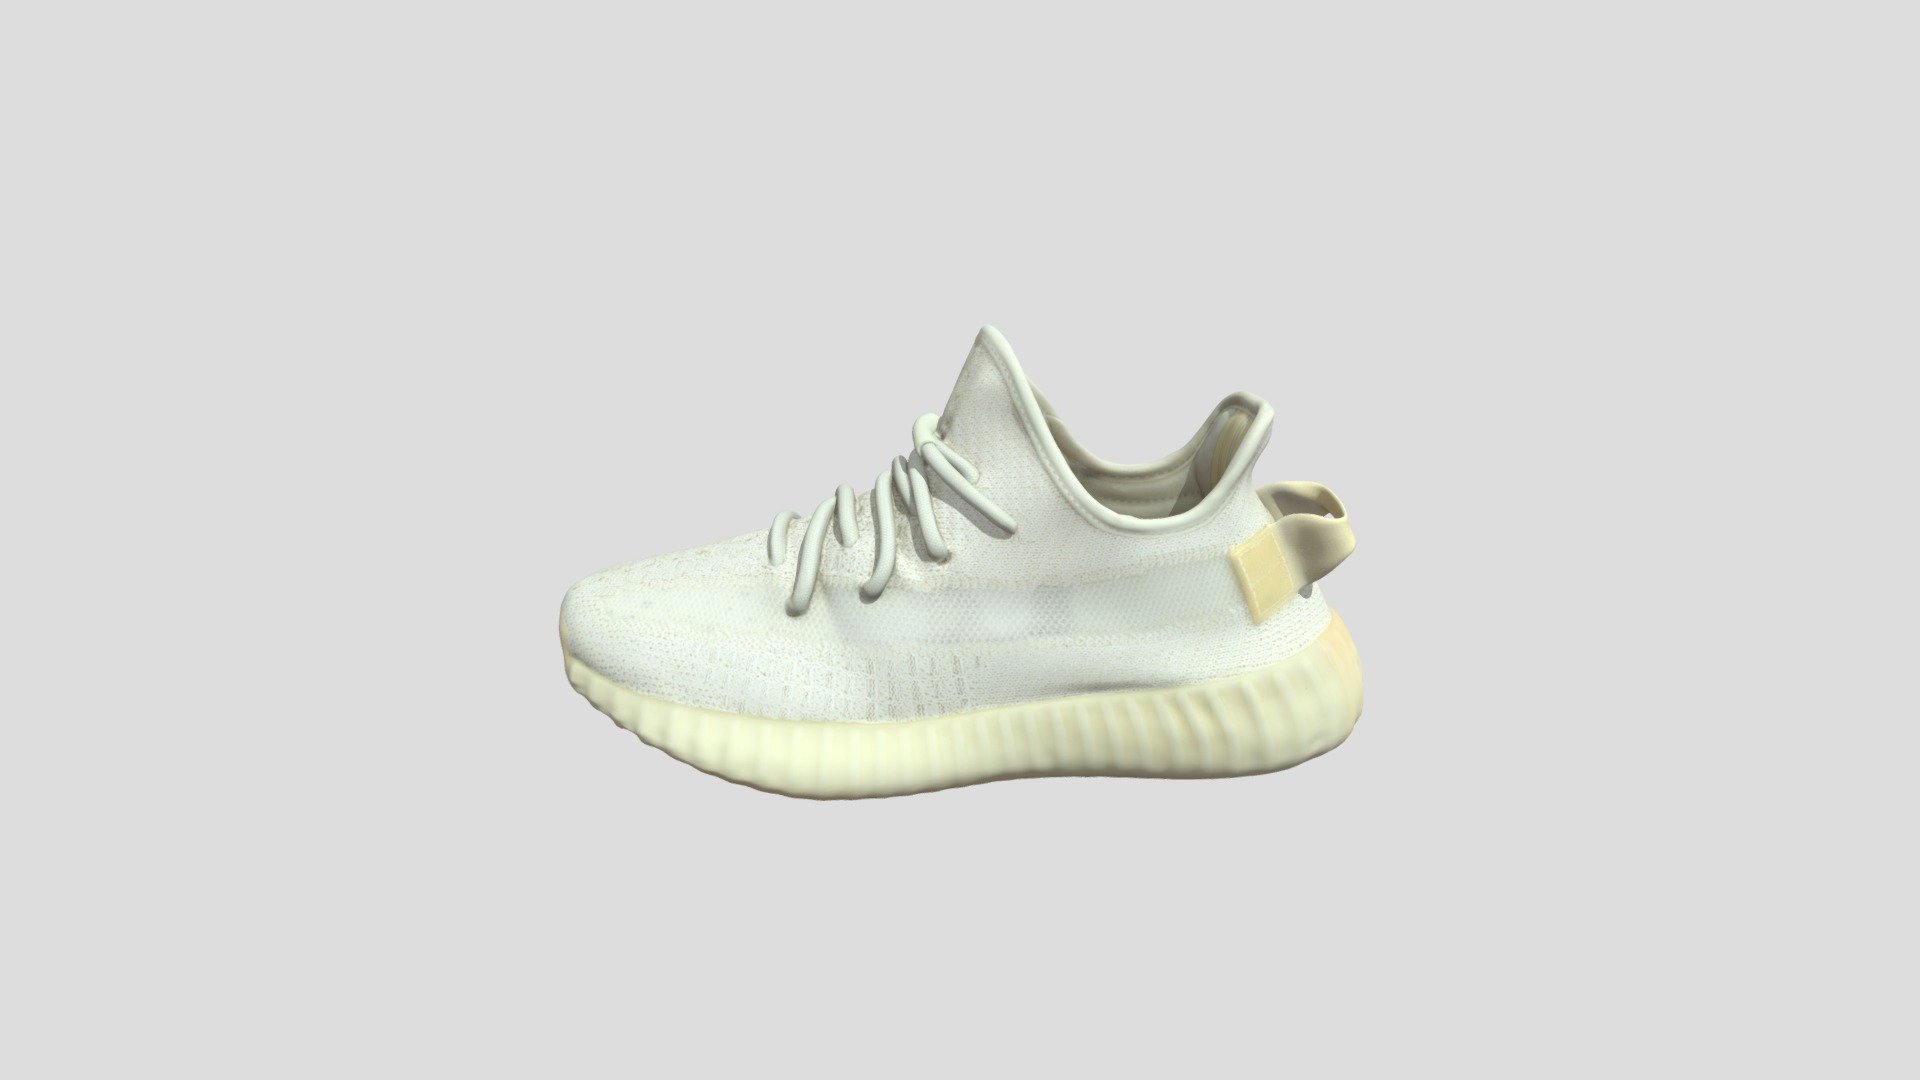 This model was created firstly by 3D scanning on retail version, and then being detail-improved manually, thus a 1:1 repulica of the original
PBR ready
Low-poly
4K texture
Welcome to check out other models we have to offer. And we do accept custom orders as well :) - Adidas Originals Yeezy Boost 350 V2 Light_GY3439 - 3D model by TRARGUS 3d model